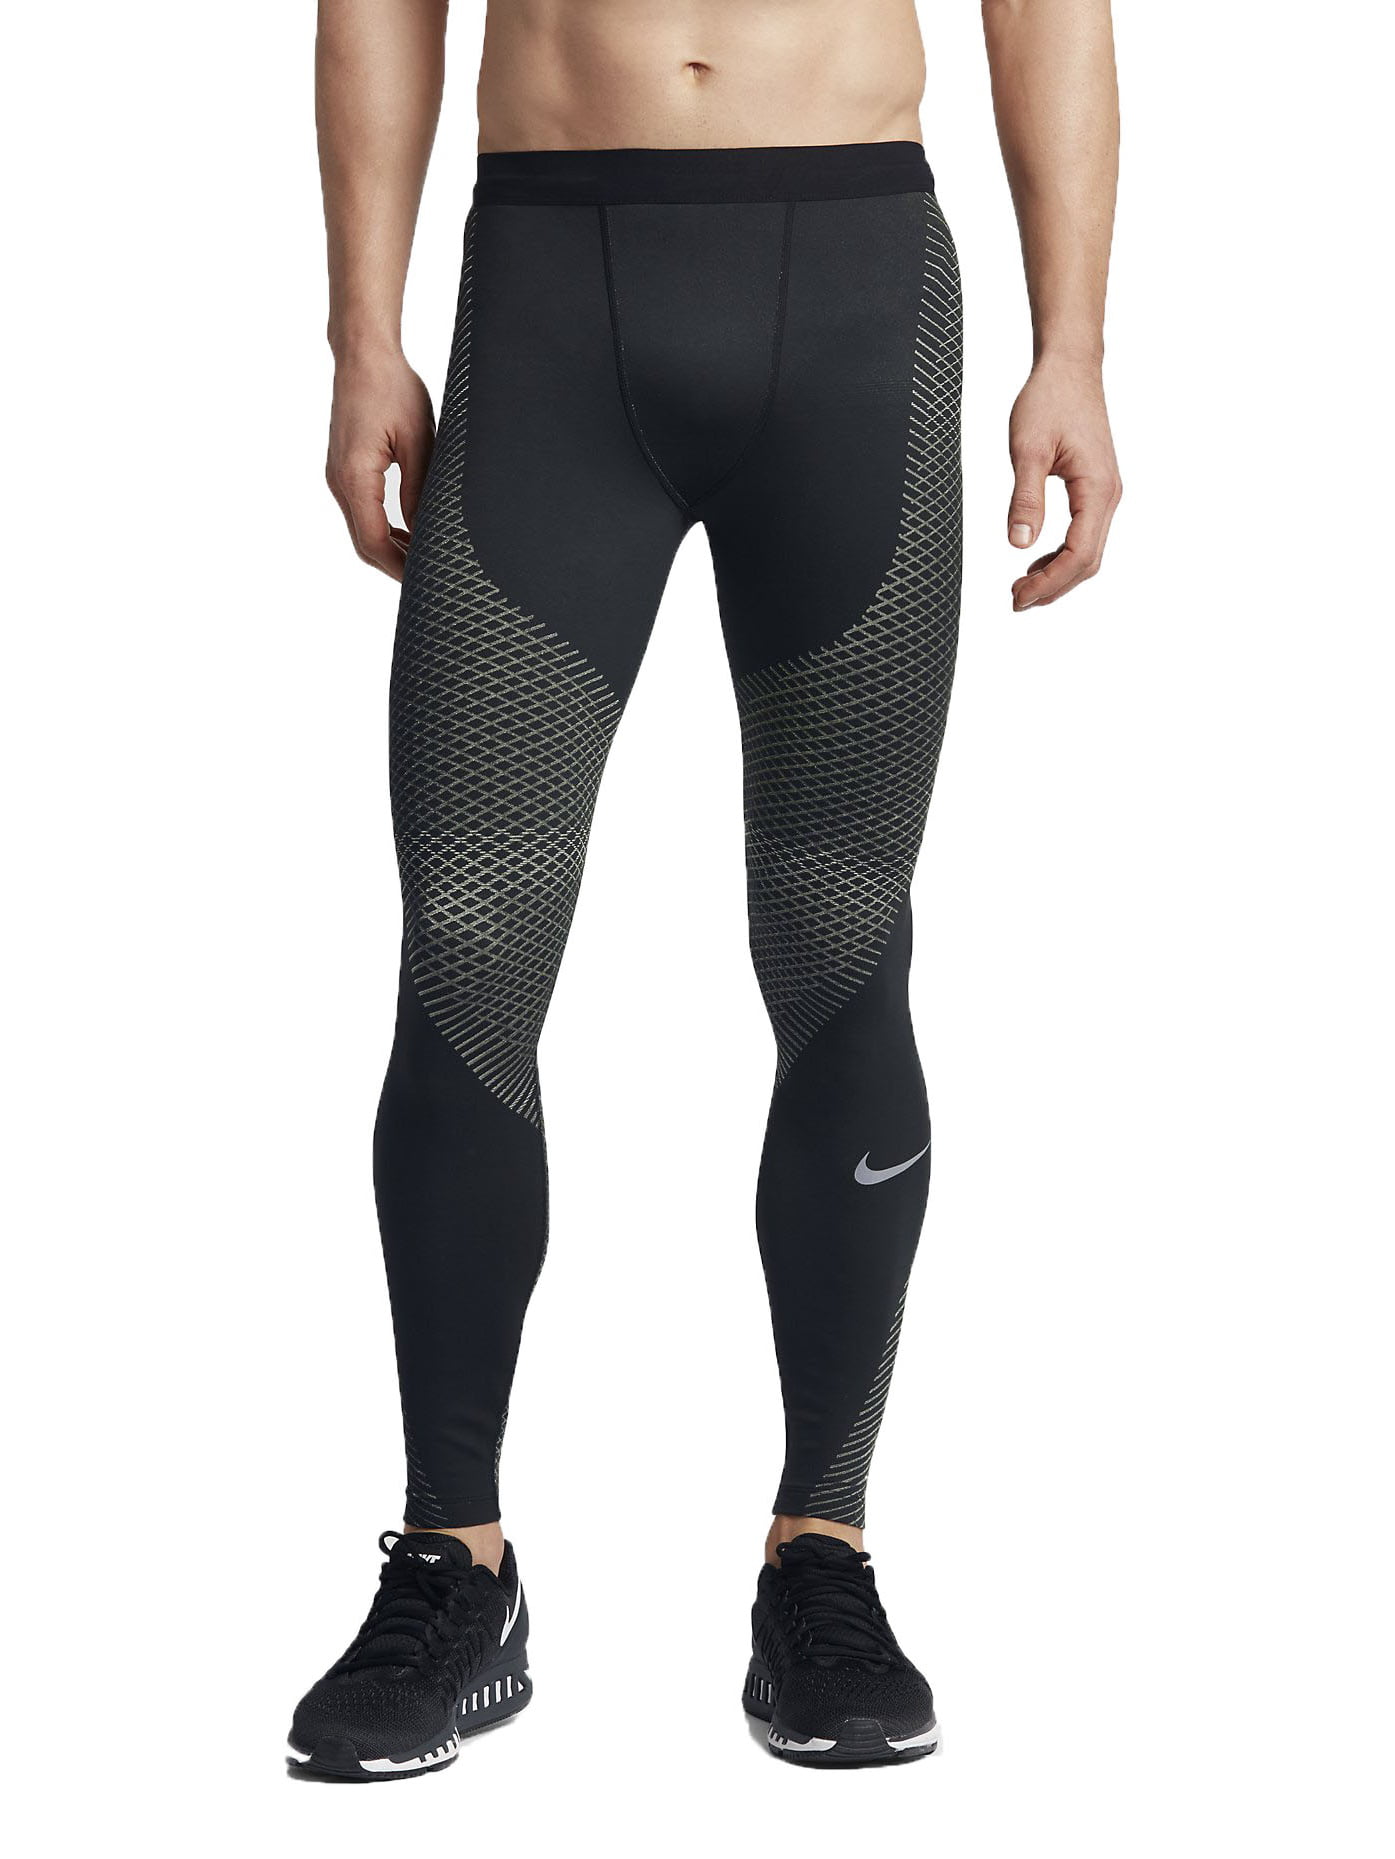 Nike Men's Zonal Strength Performance Compression Running Tights, Black,  Large 